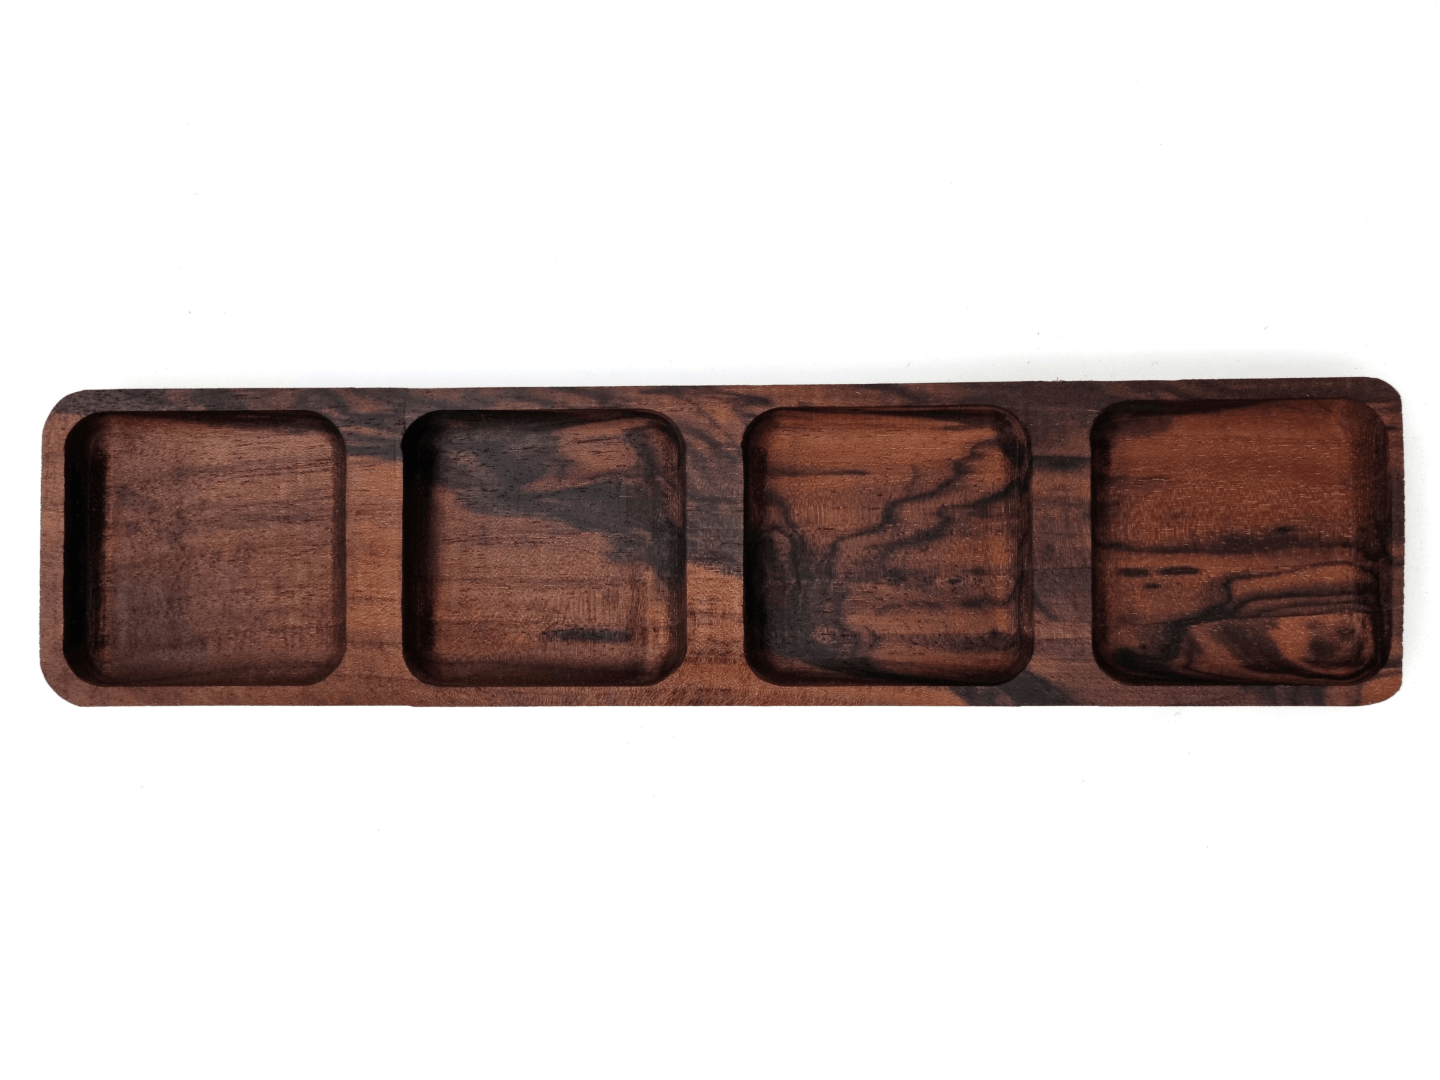 Walnut Divided Serving Plate - Snack Plate - Saucer Plate